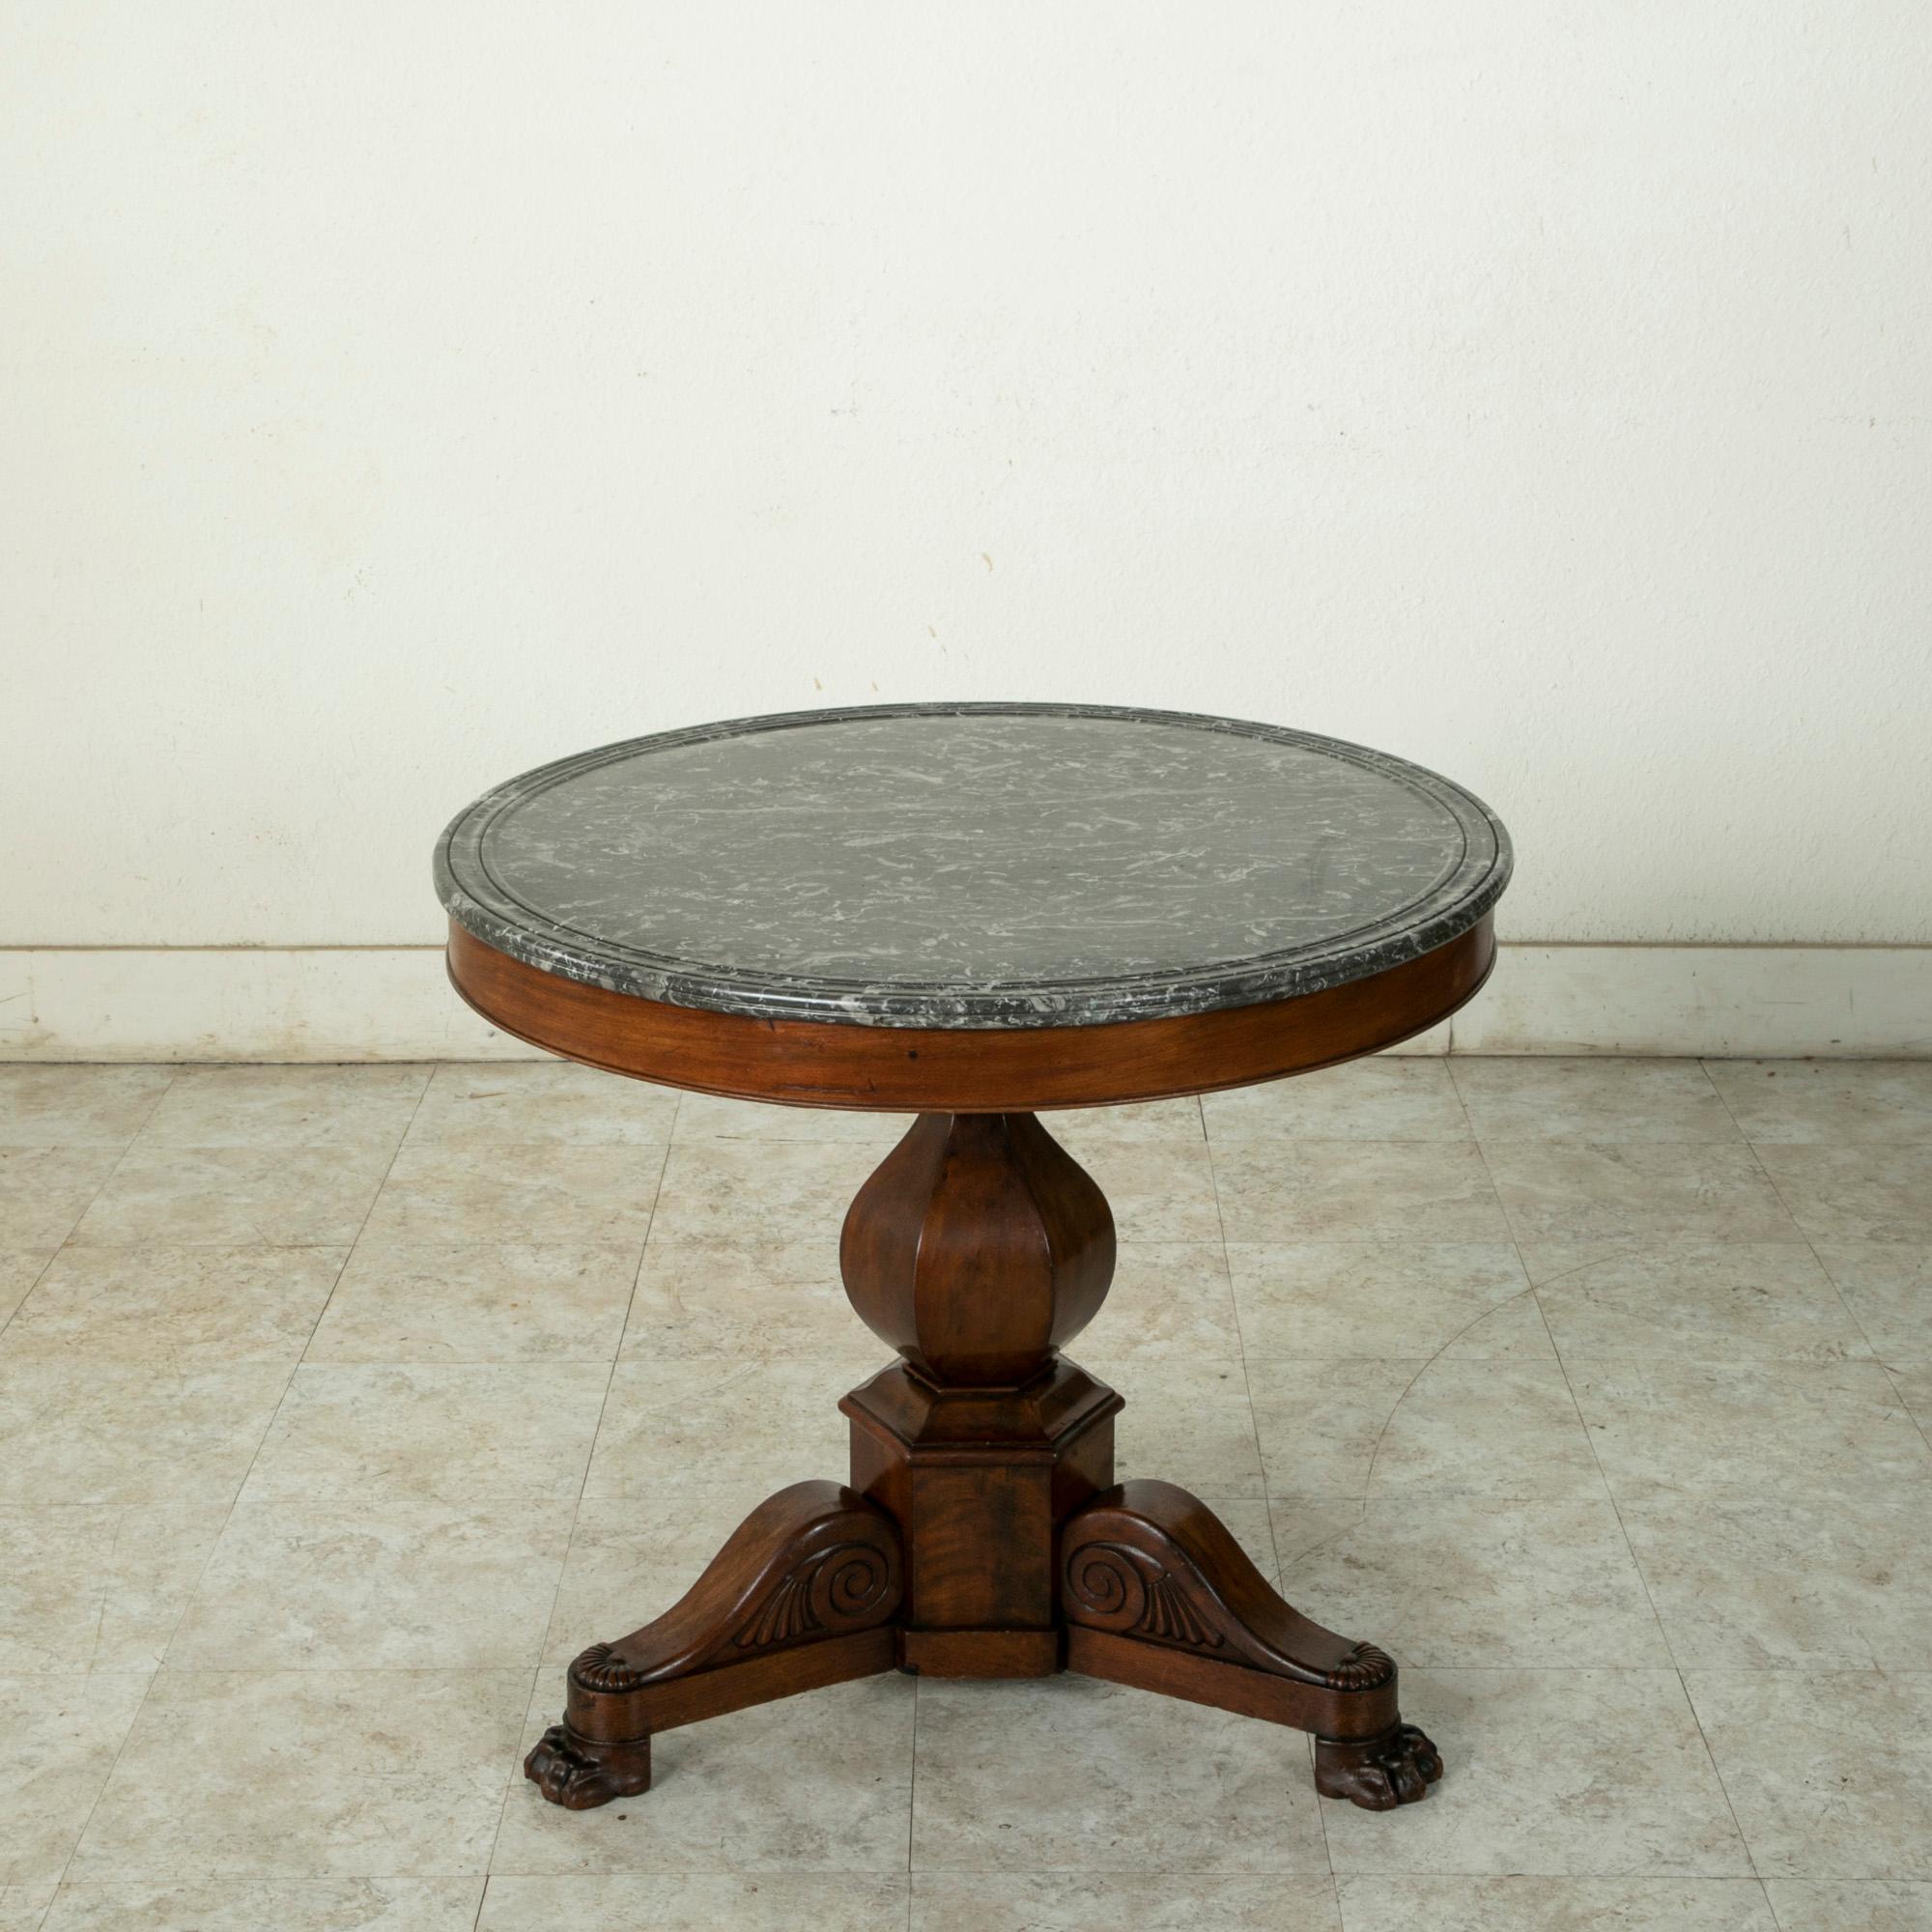 This early nineteenth century Restauration period mahogany gueridon or pedestal table features a multi-beveled Saint Anne marble top. Its 31.75 inch diameter top is supported by a faceted central pillar that rests on a tripod base. Its three legs